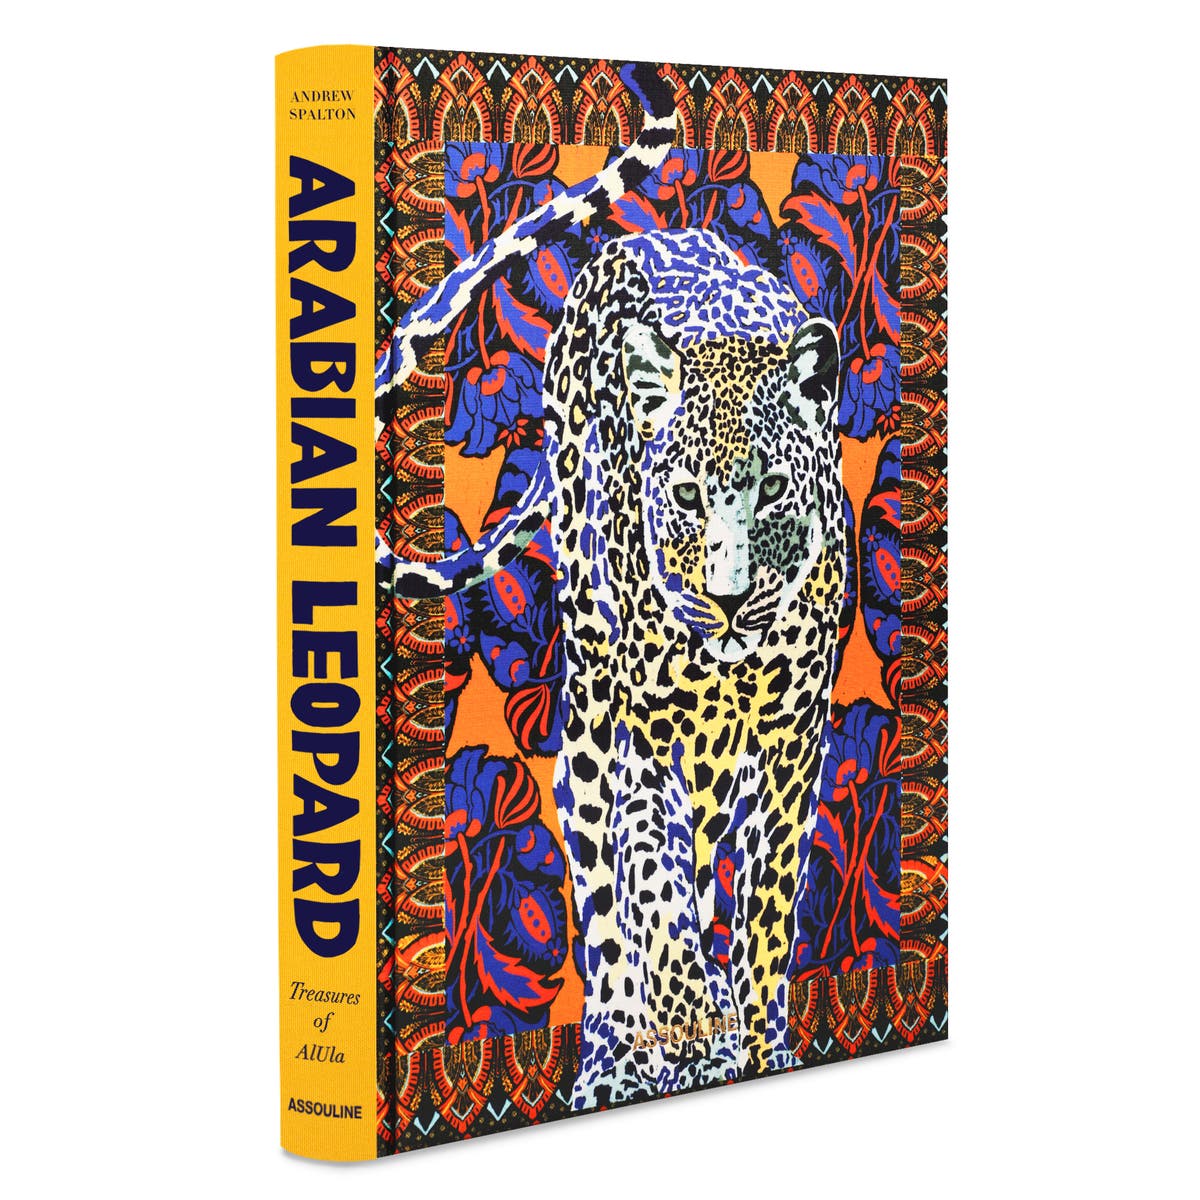 ‘The Arabian Leopard is mysterious and rare,’ says Assouline founder